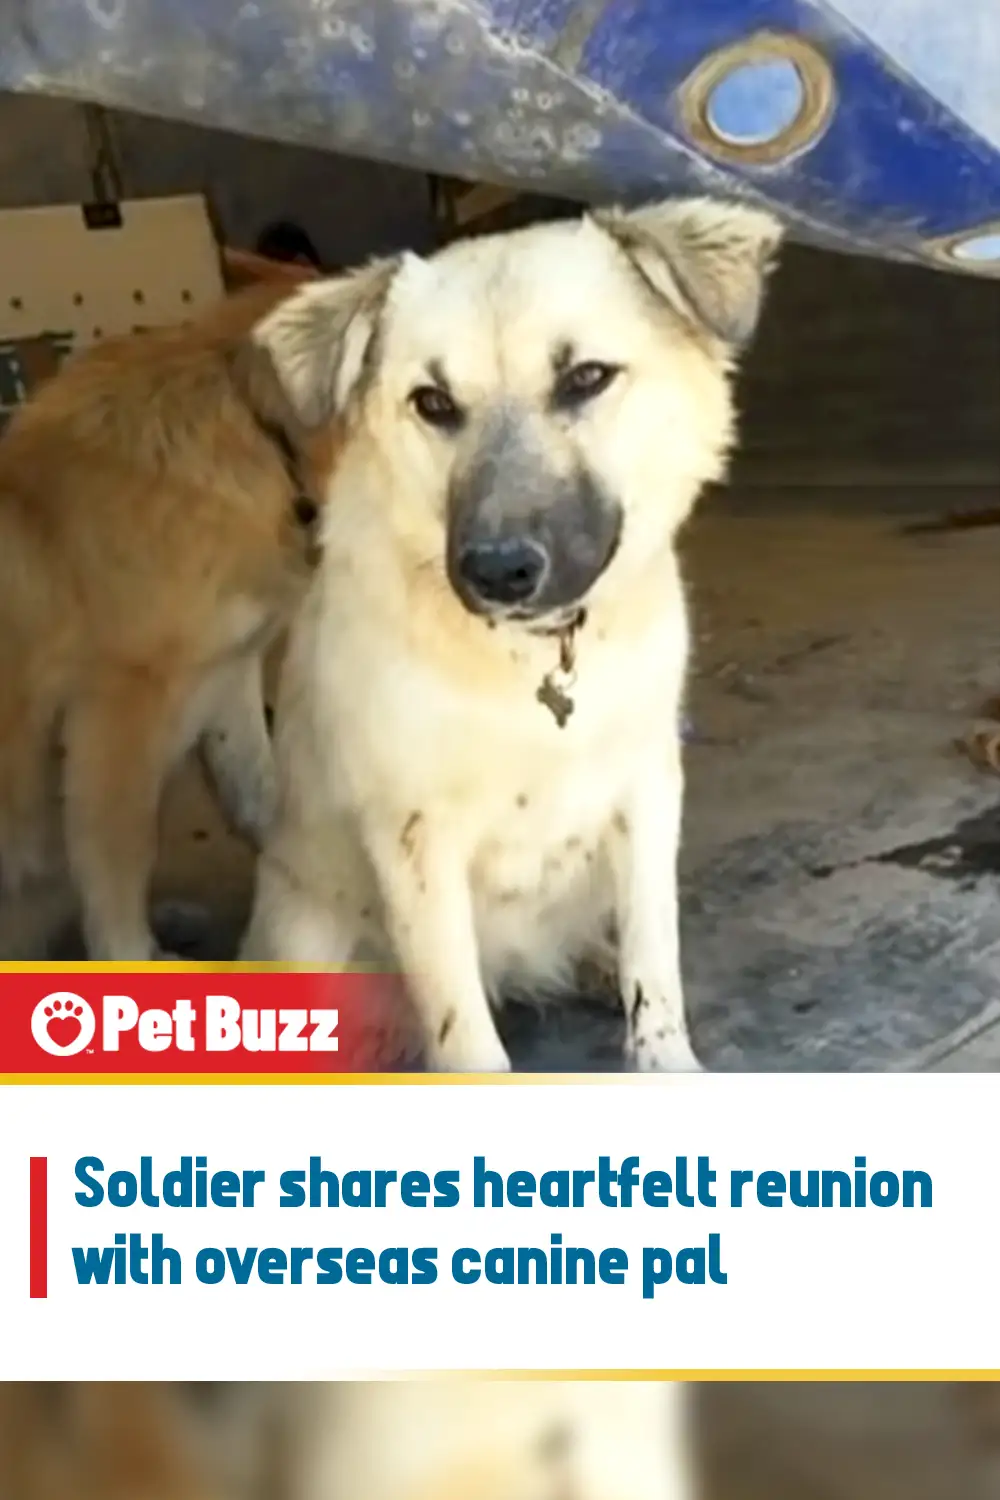 Soldier shares heartfelt reunion with overseas canine pal